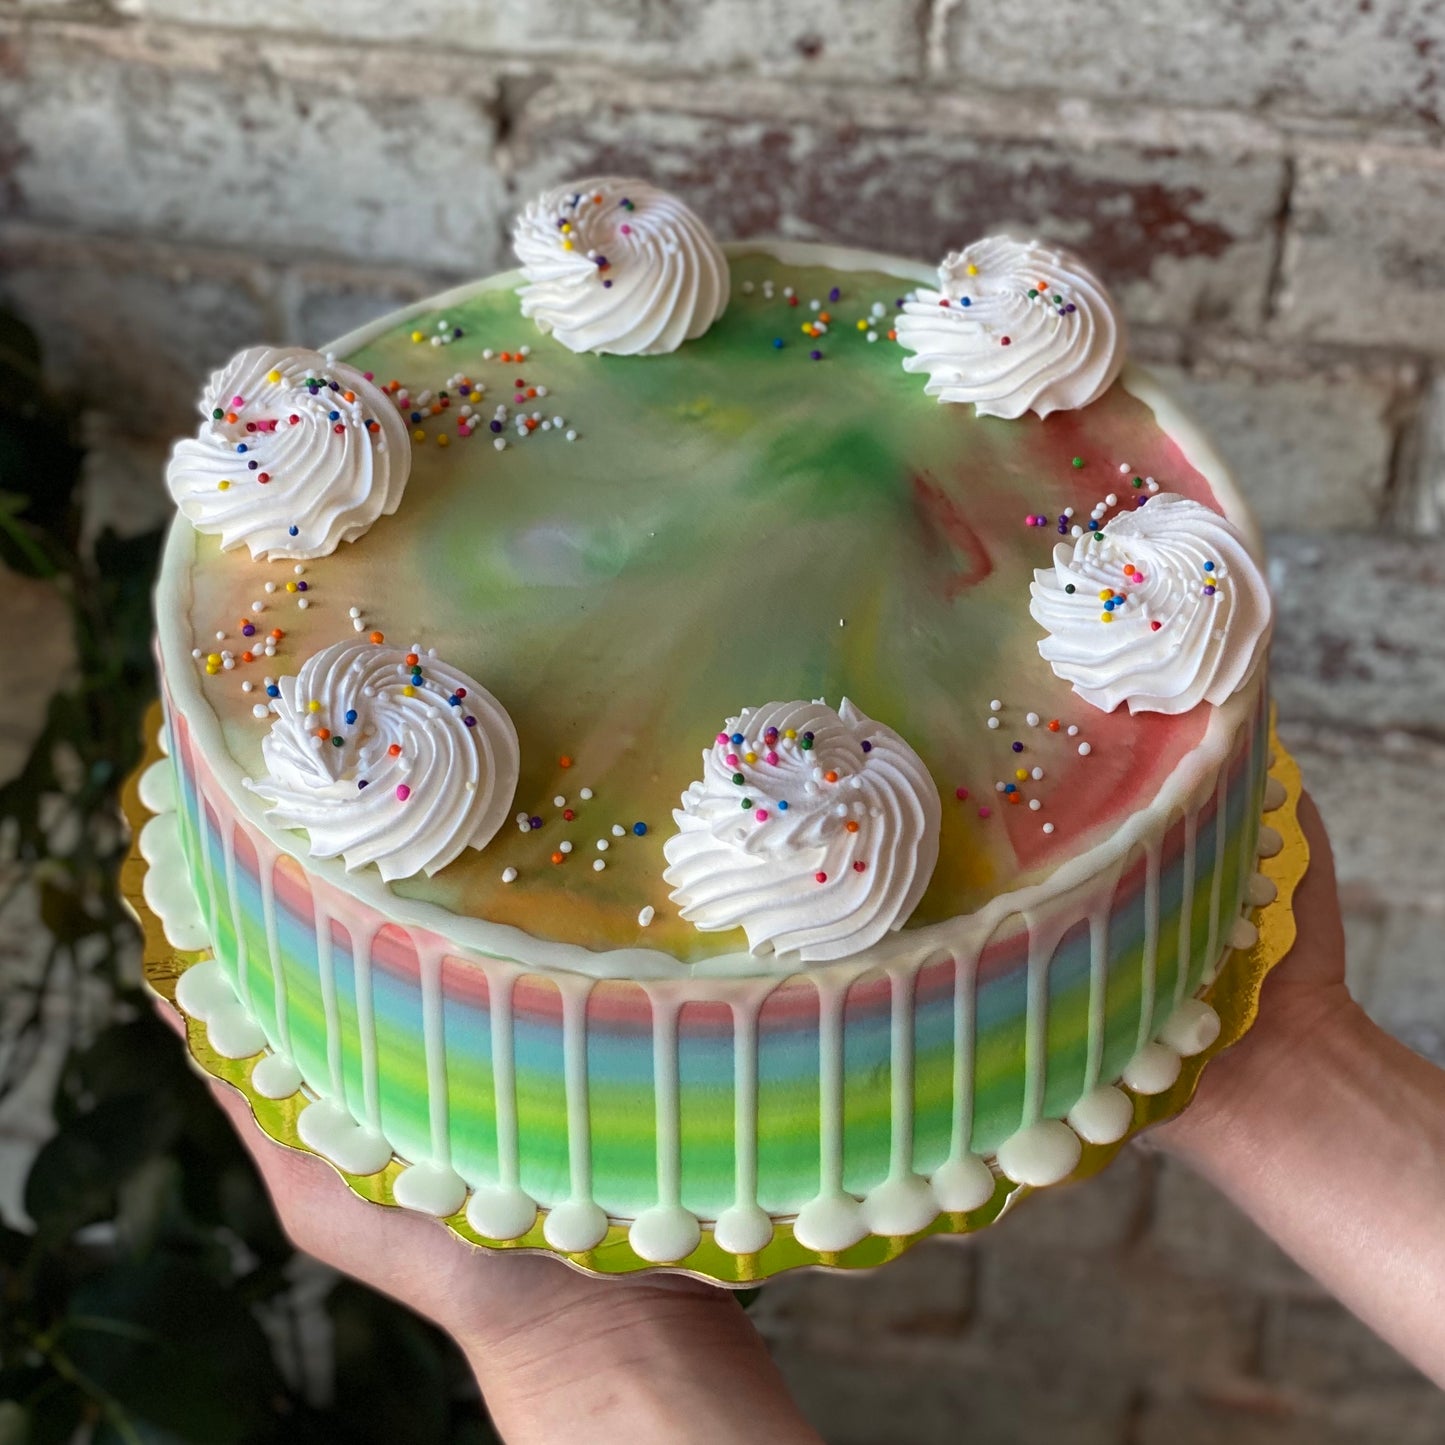 Colourful cake with white dollops